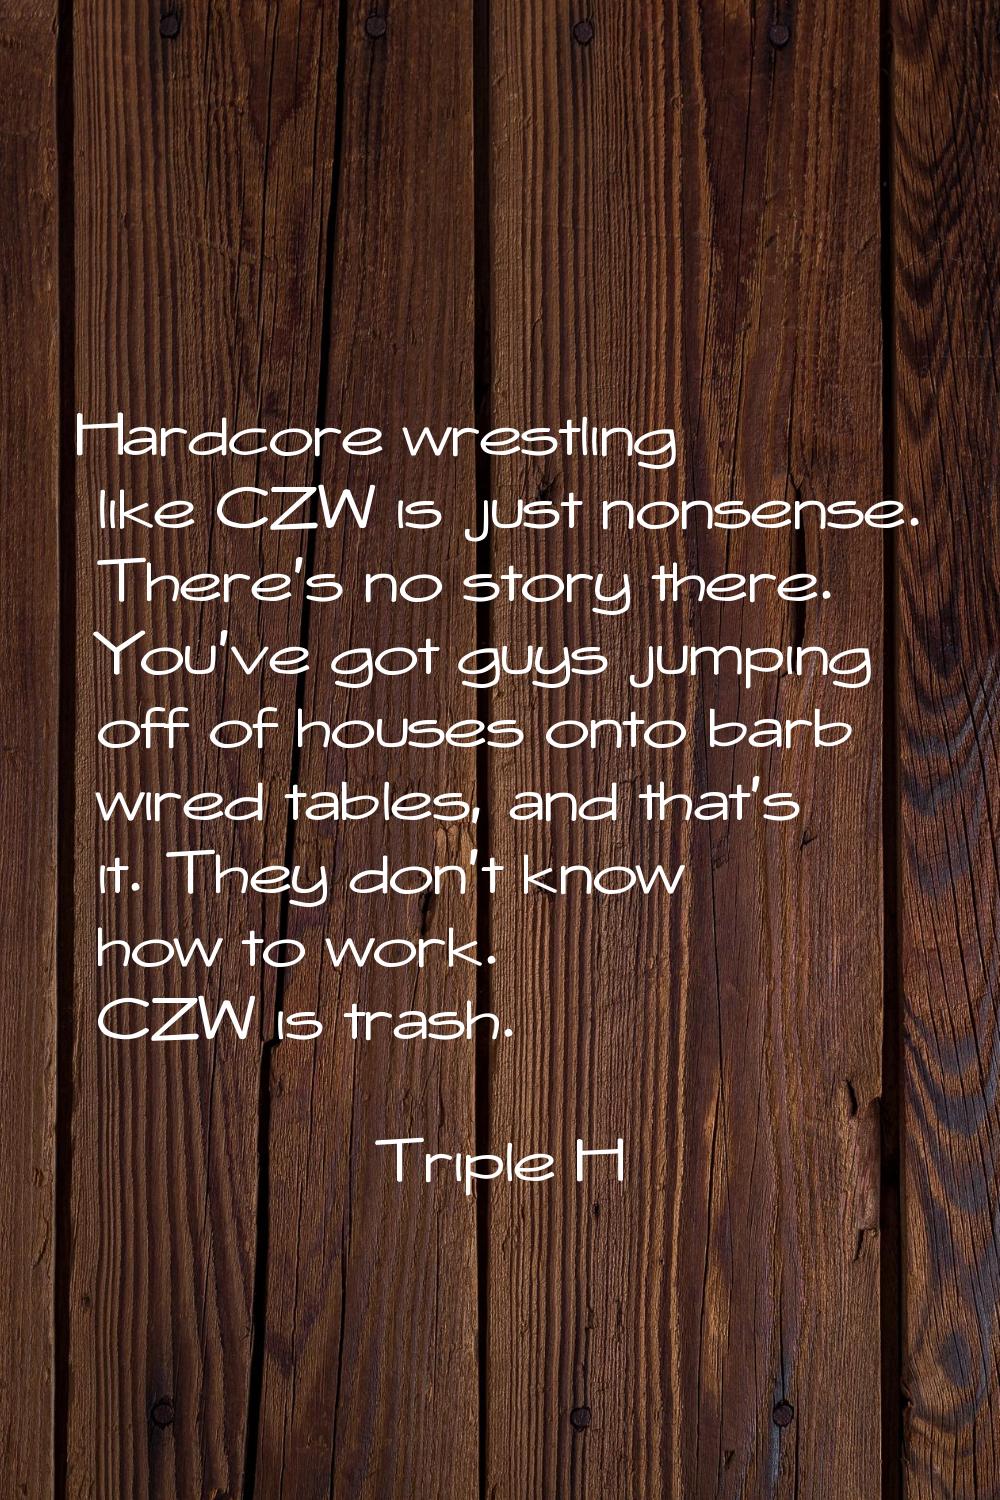 Hardcore wrestling like CZW is just nonsense. There's no story there. You've got guys jumping off o